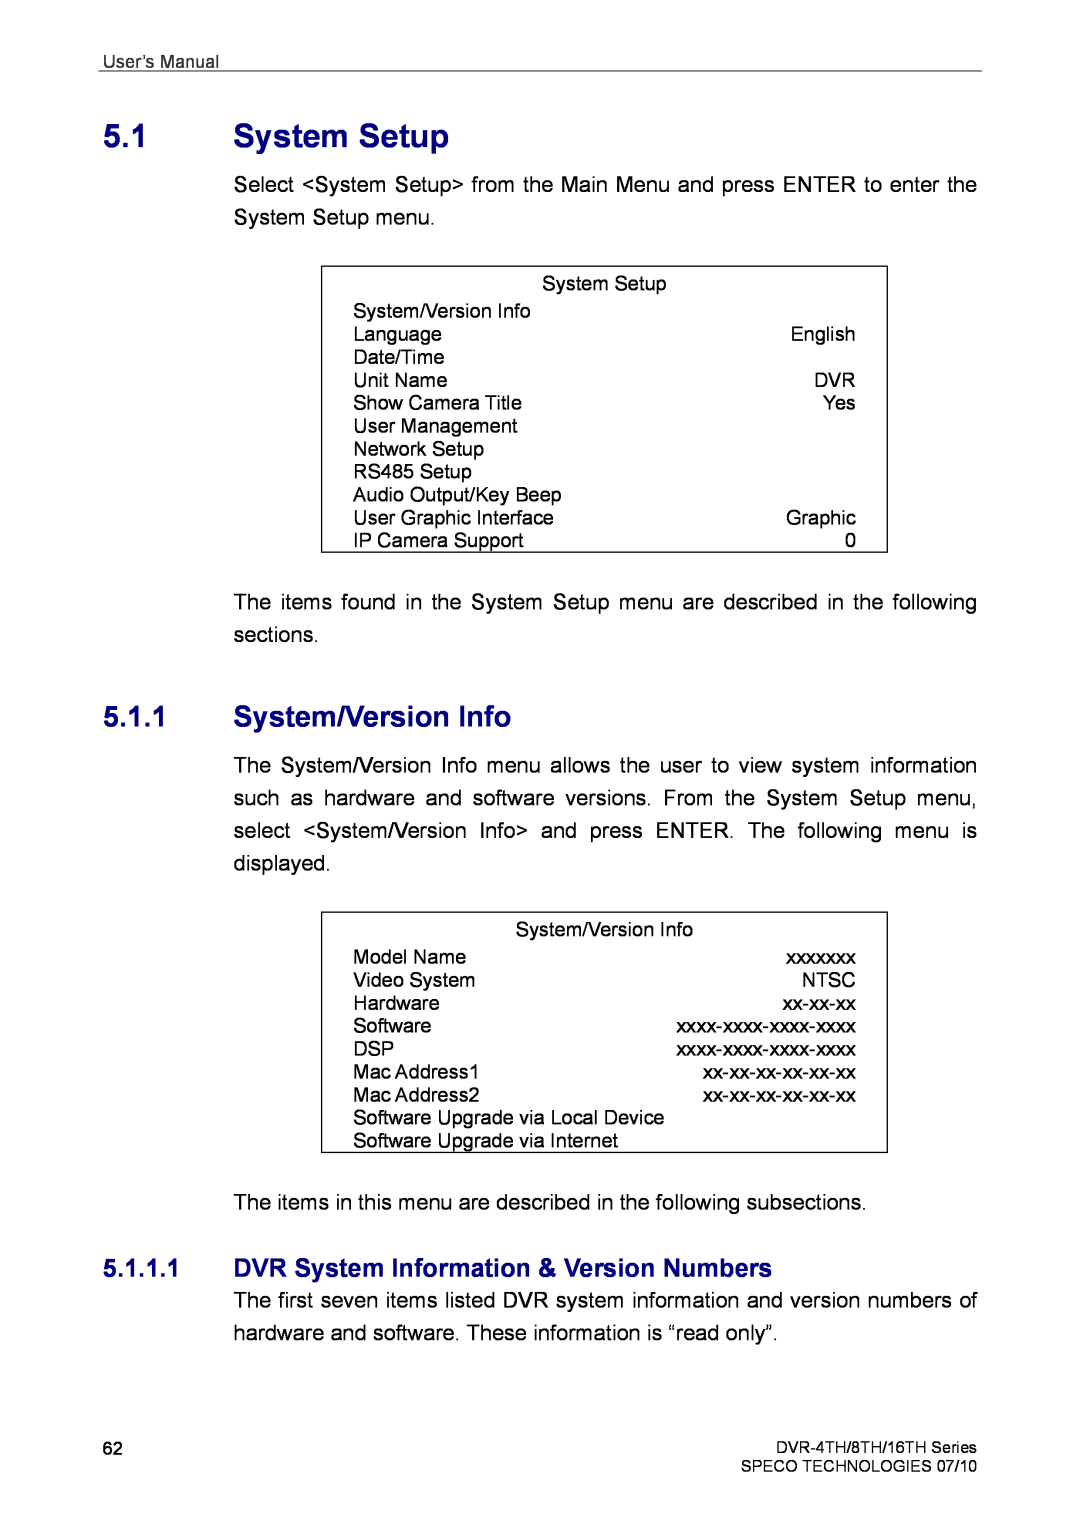 Speco Technologies 8TH, 4TH, 16TH user manual System Setup, System/Version Info, DVR System Information & Version Numbers 